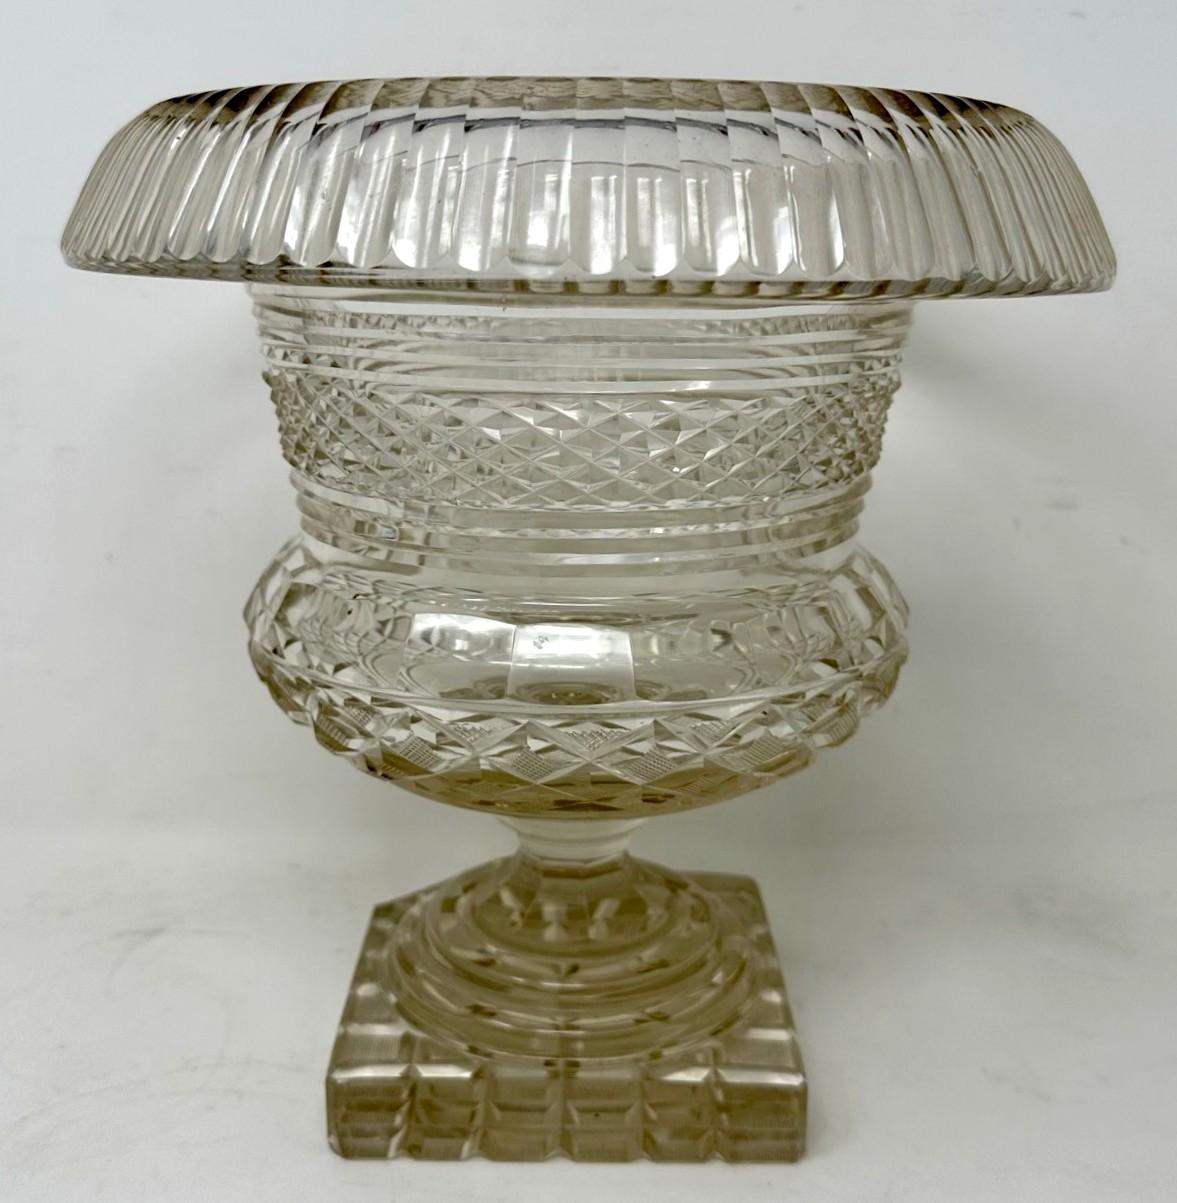 An impressive Hand Deep Cut full lead Irish Crystal Pedestal Turn-over Bowl or Centerpiece of circular outline and unusually large proportions. Made by the Old Waterford Glass Company, County Tipperary in Ireland, early to mid-Nineteenth Century.